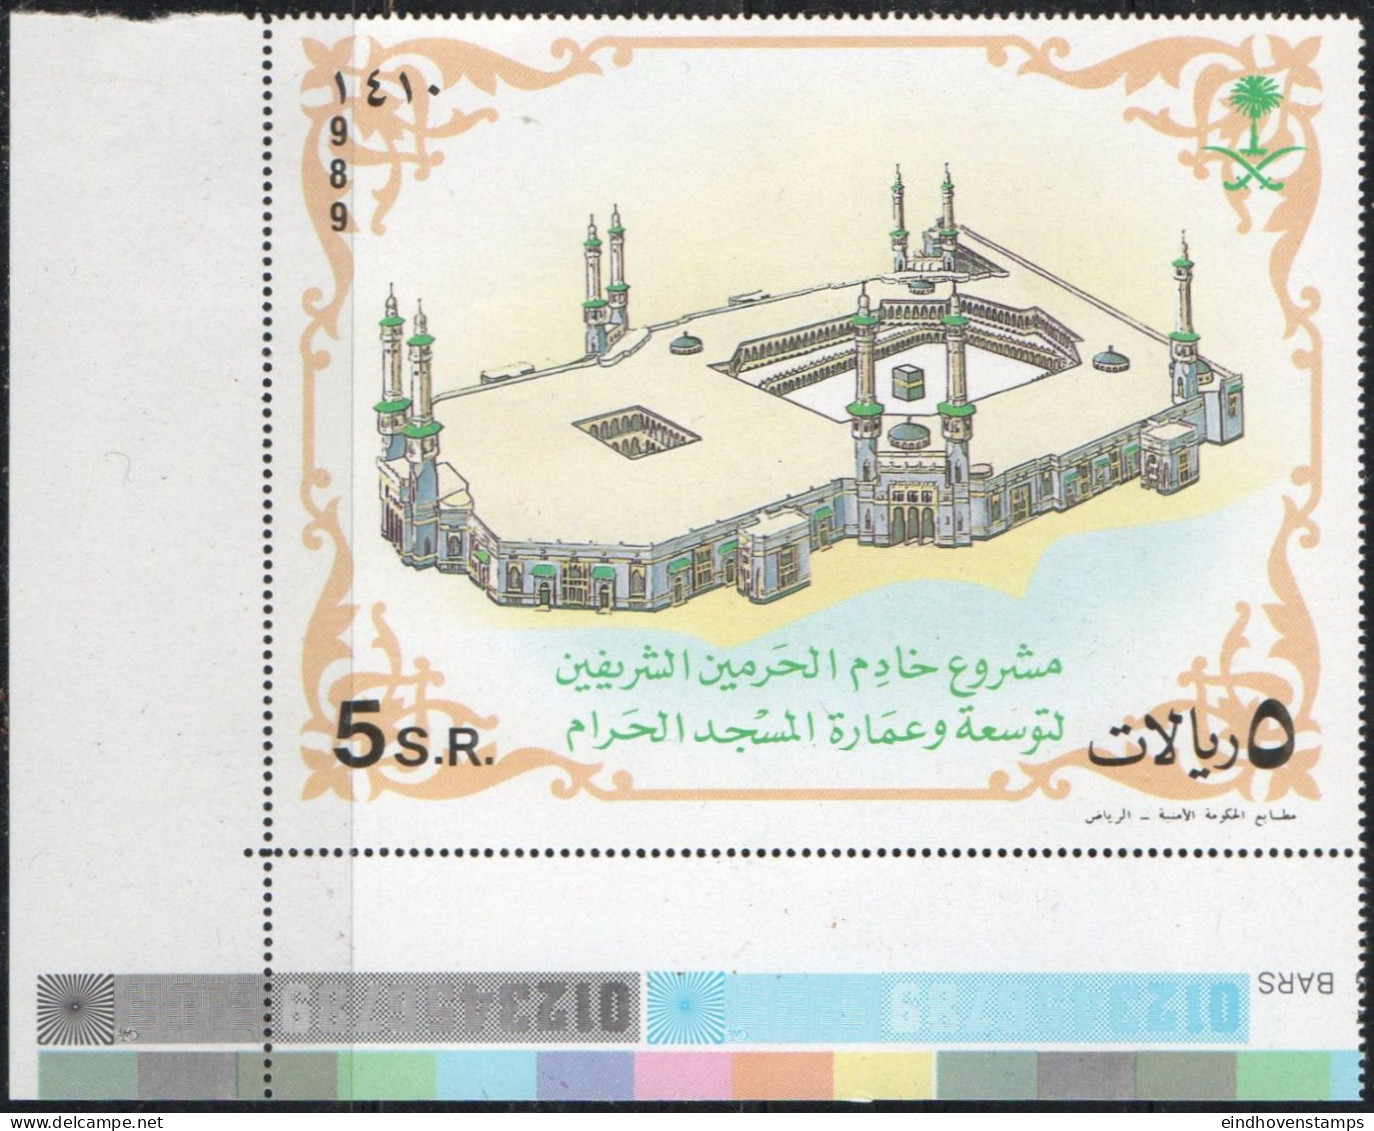 Saudi Arabia 1989 Expansion Of Holy Mosque Mecca Block Issue MNH SA-89-16 Left Lower Sheet Corner - Moscheen Und Synagogen